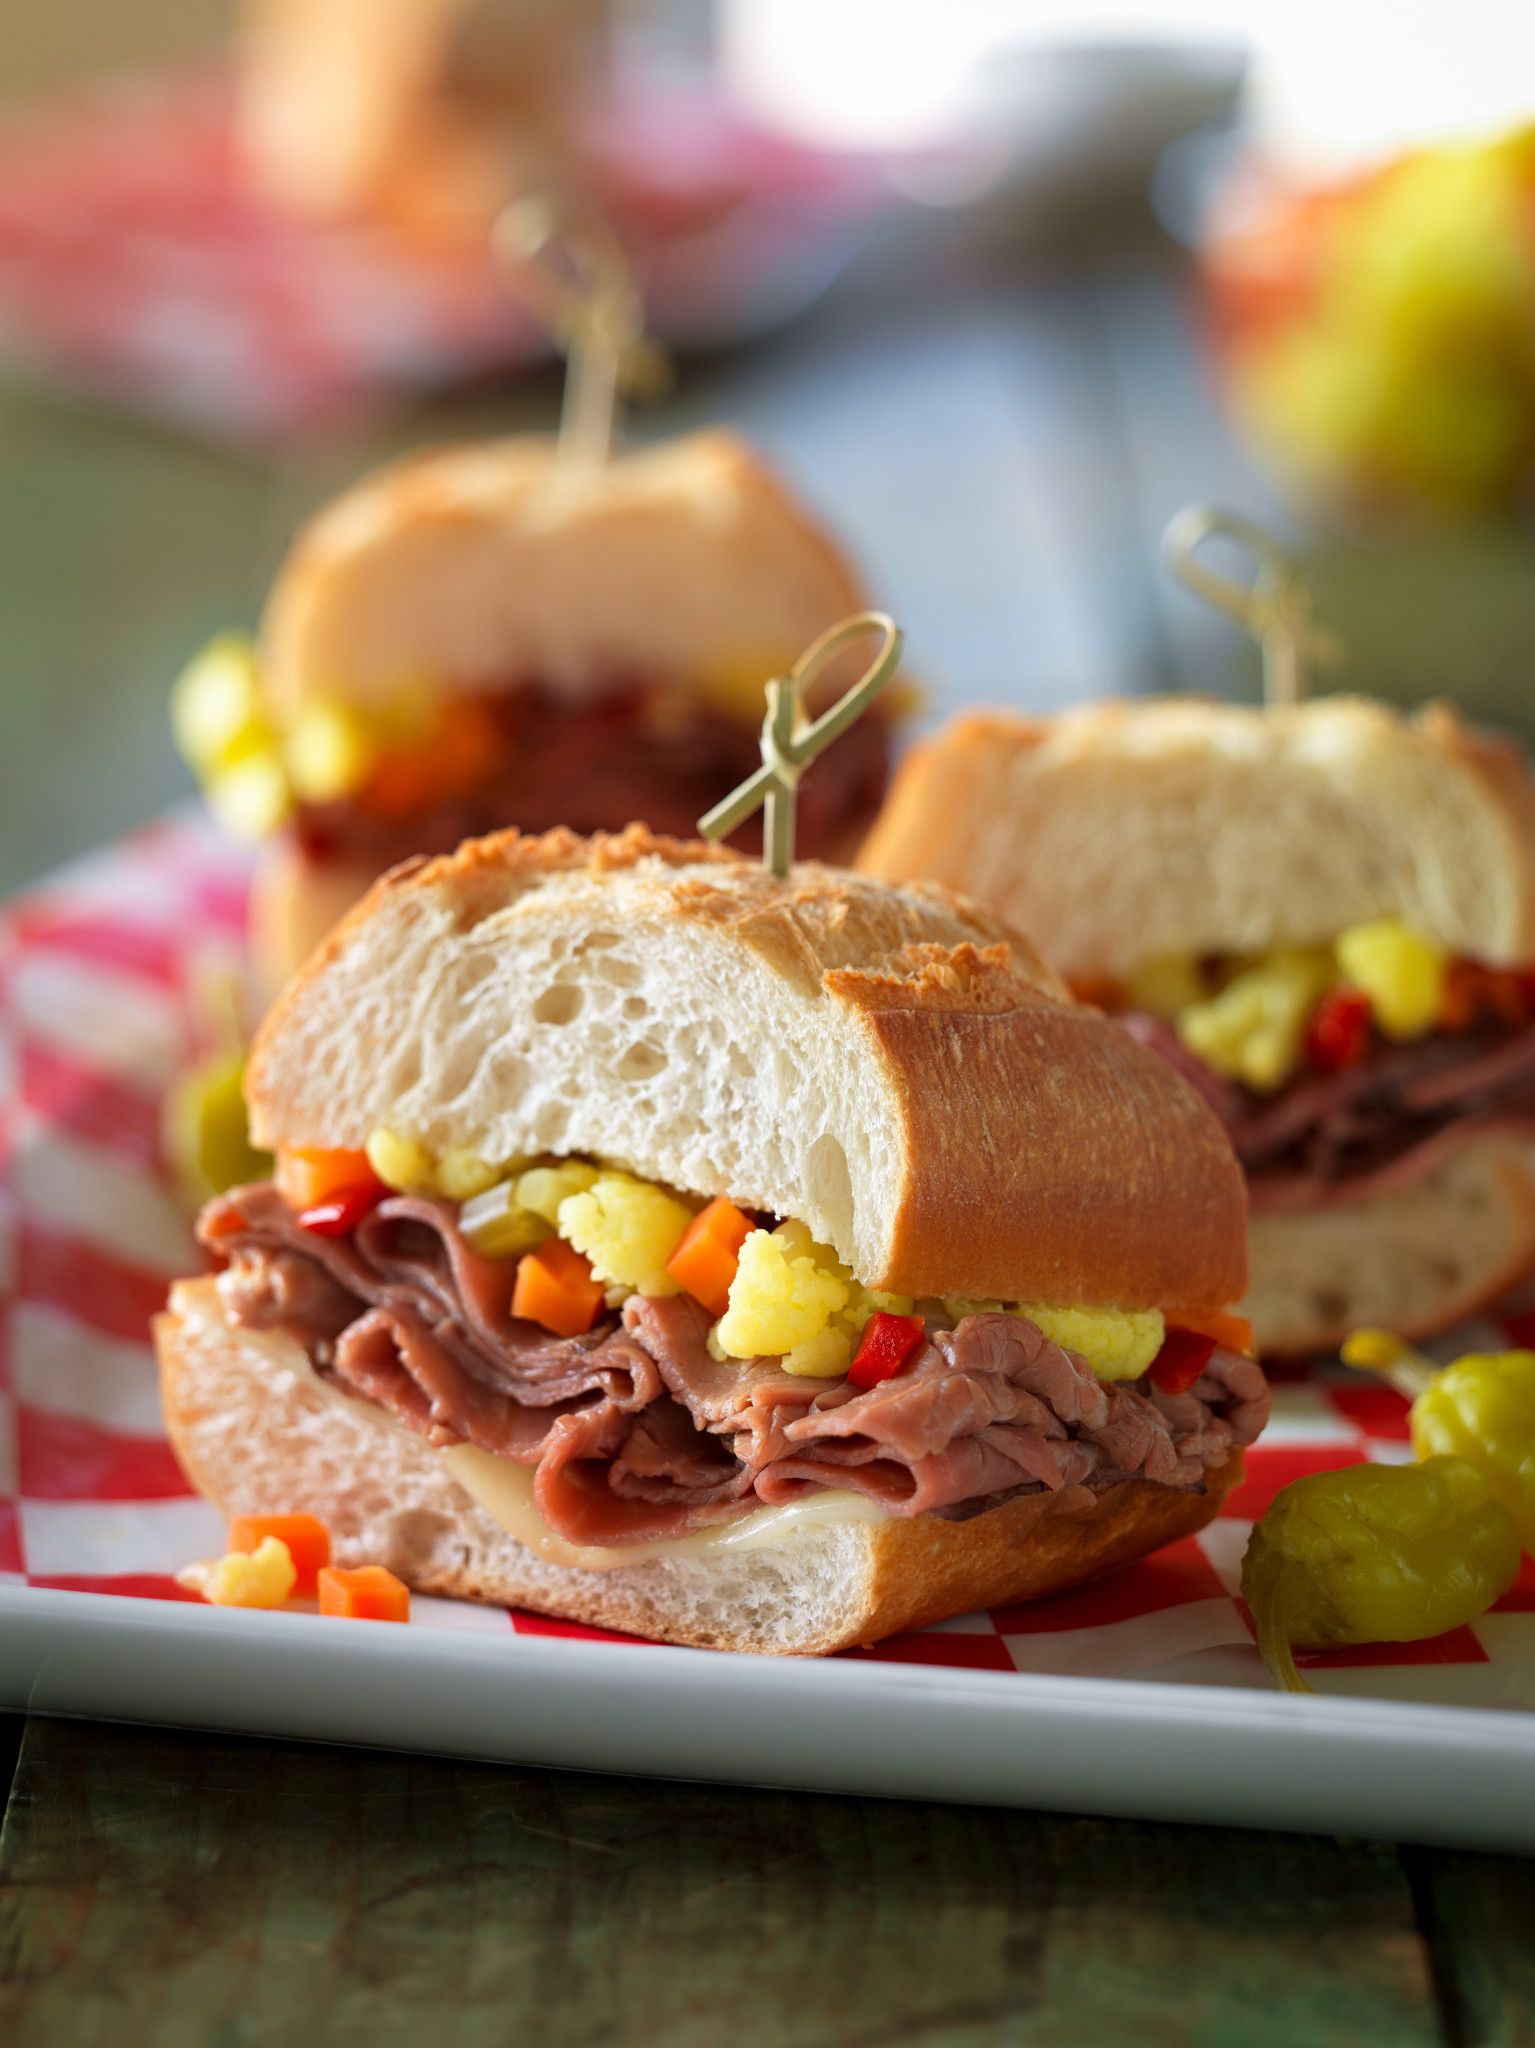 Chicago-Style Italian Beef Sandwiches